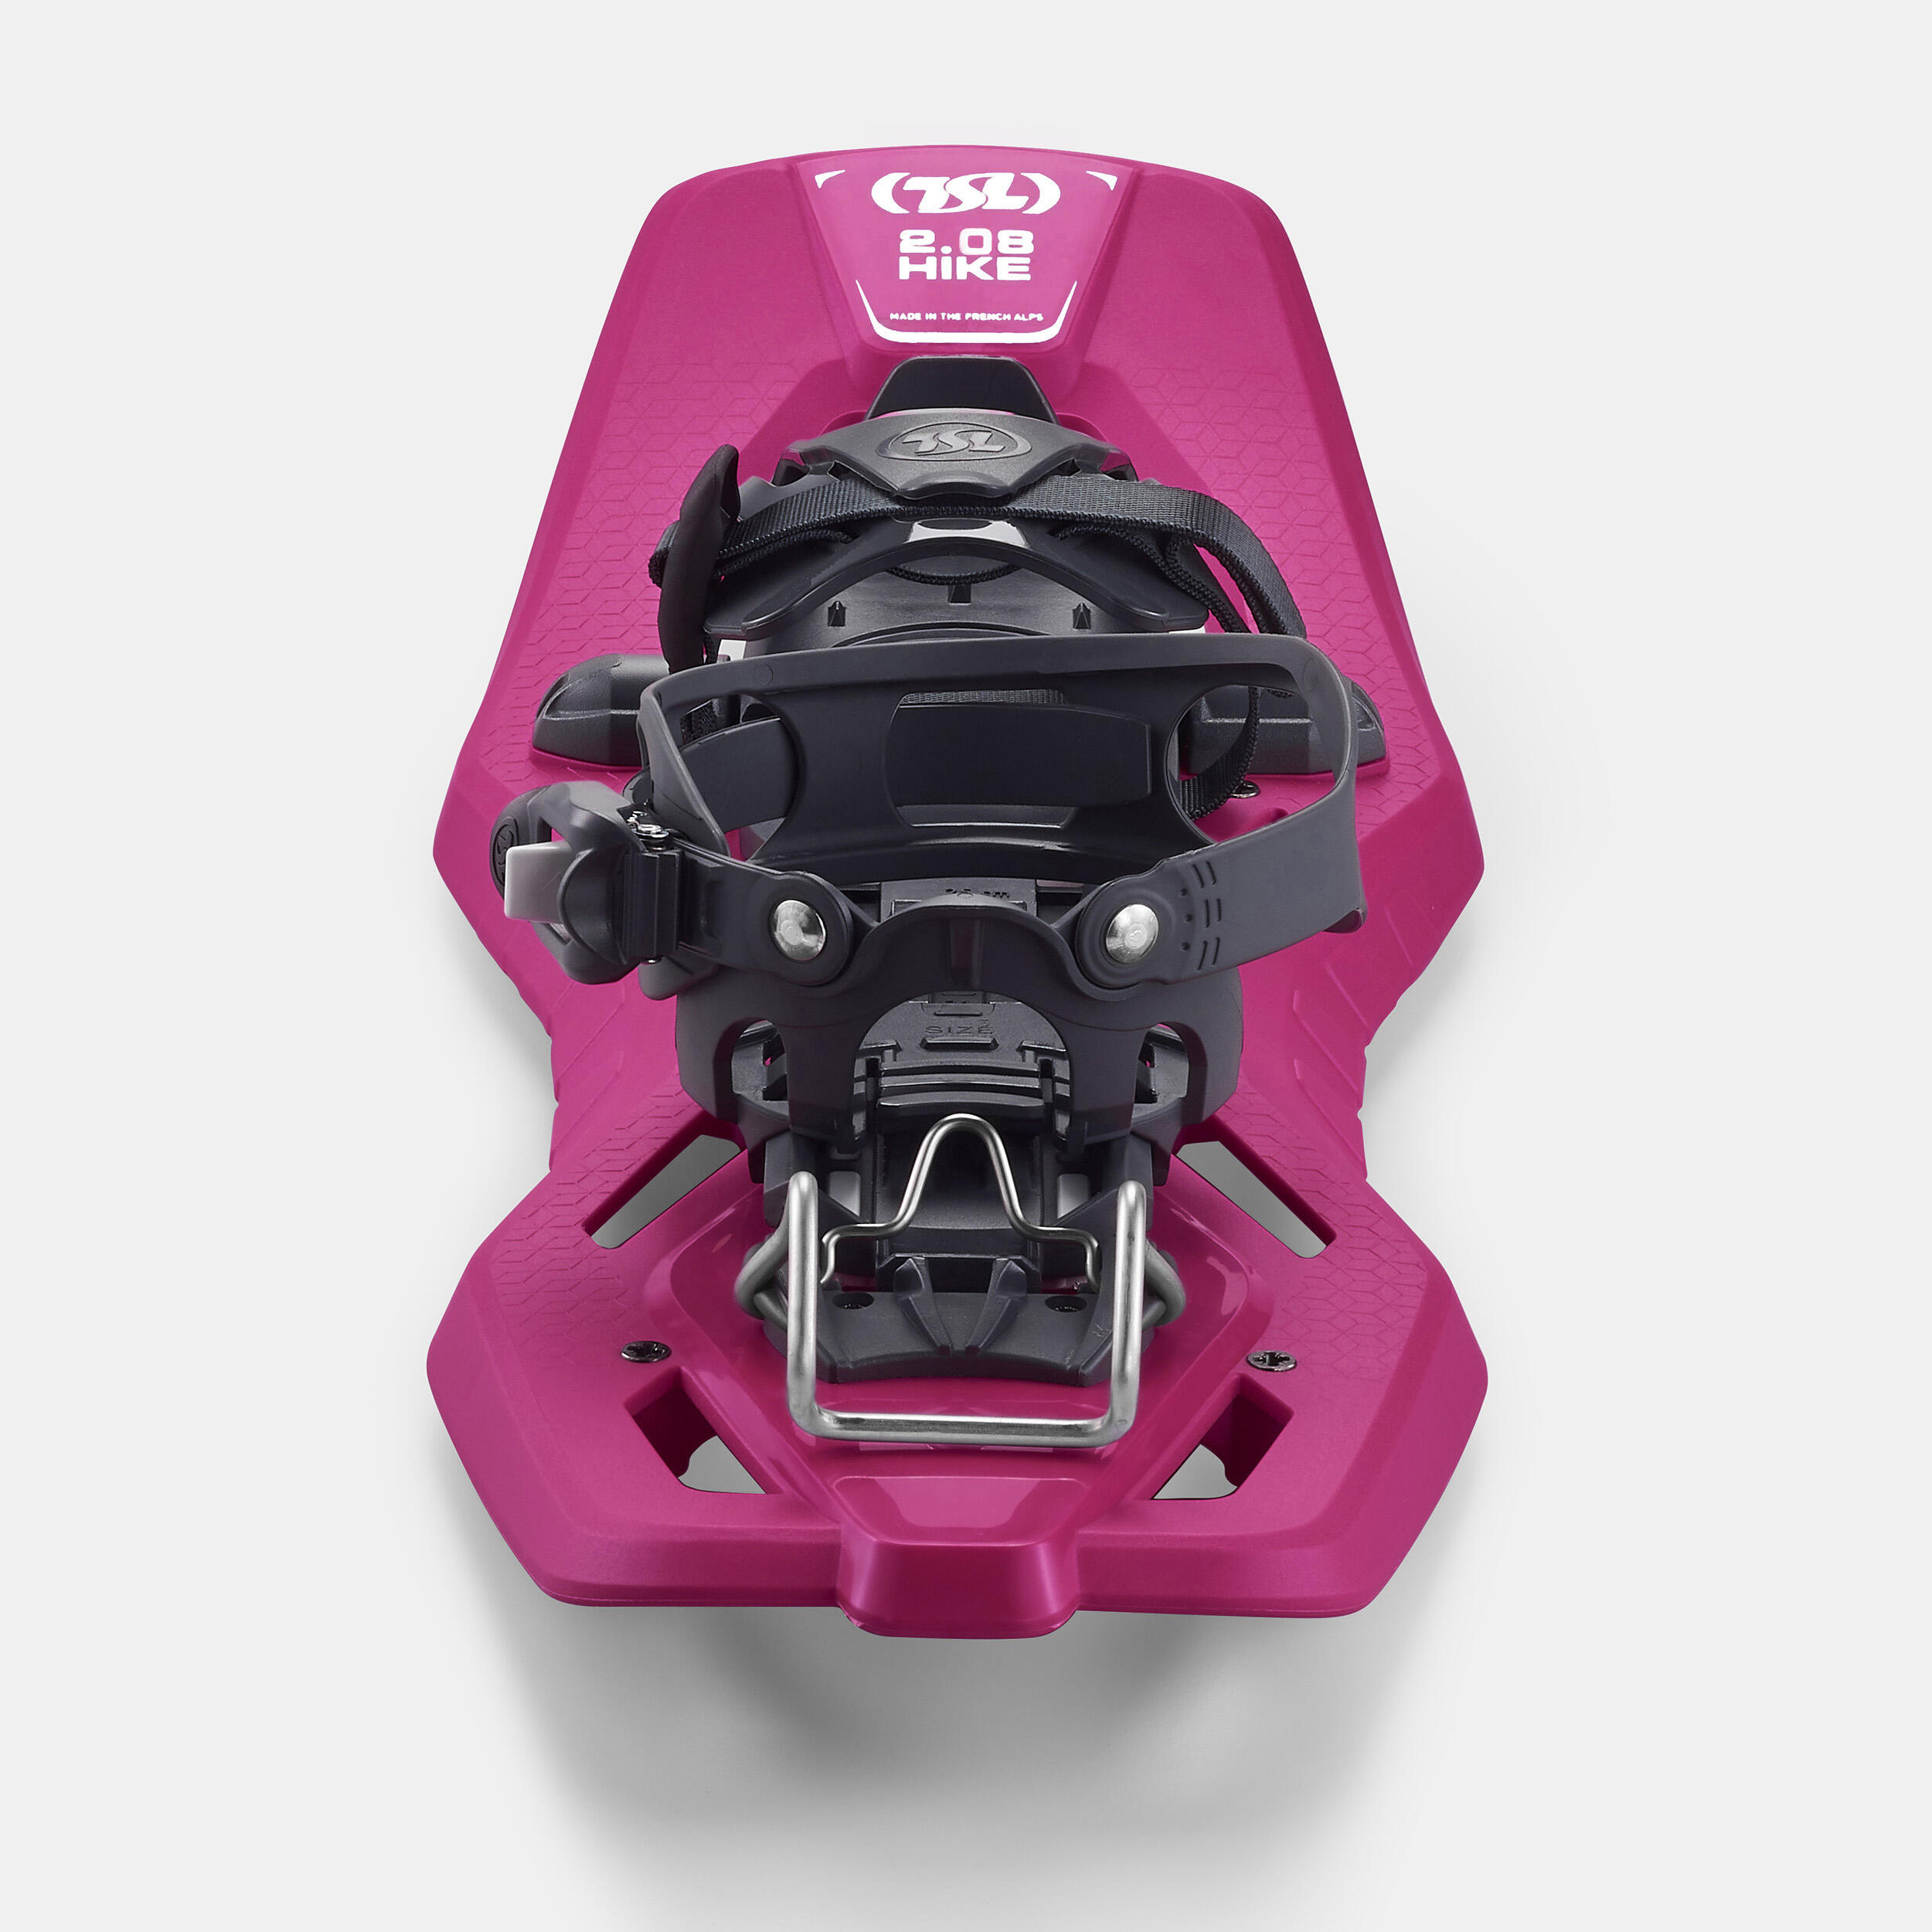 Small Deck Snowshoes - TSL 2.08 HIKE Pink - 5/10